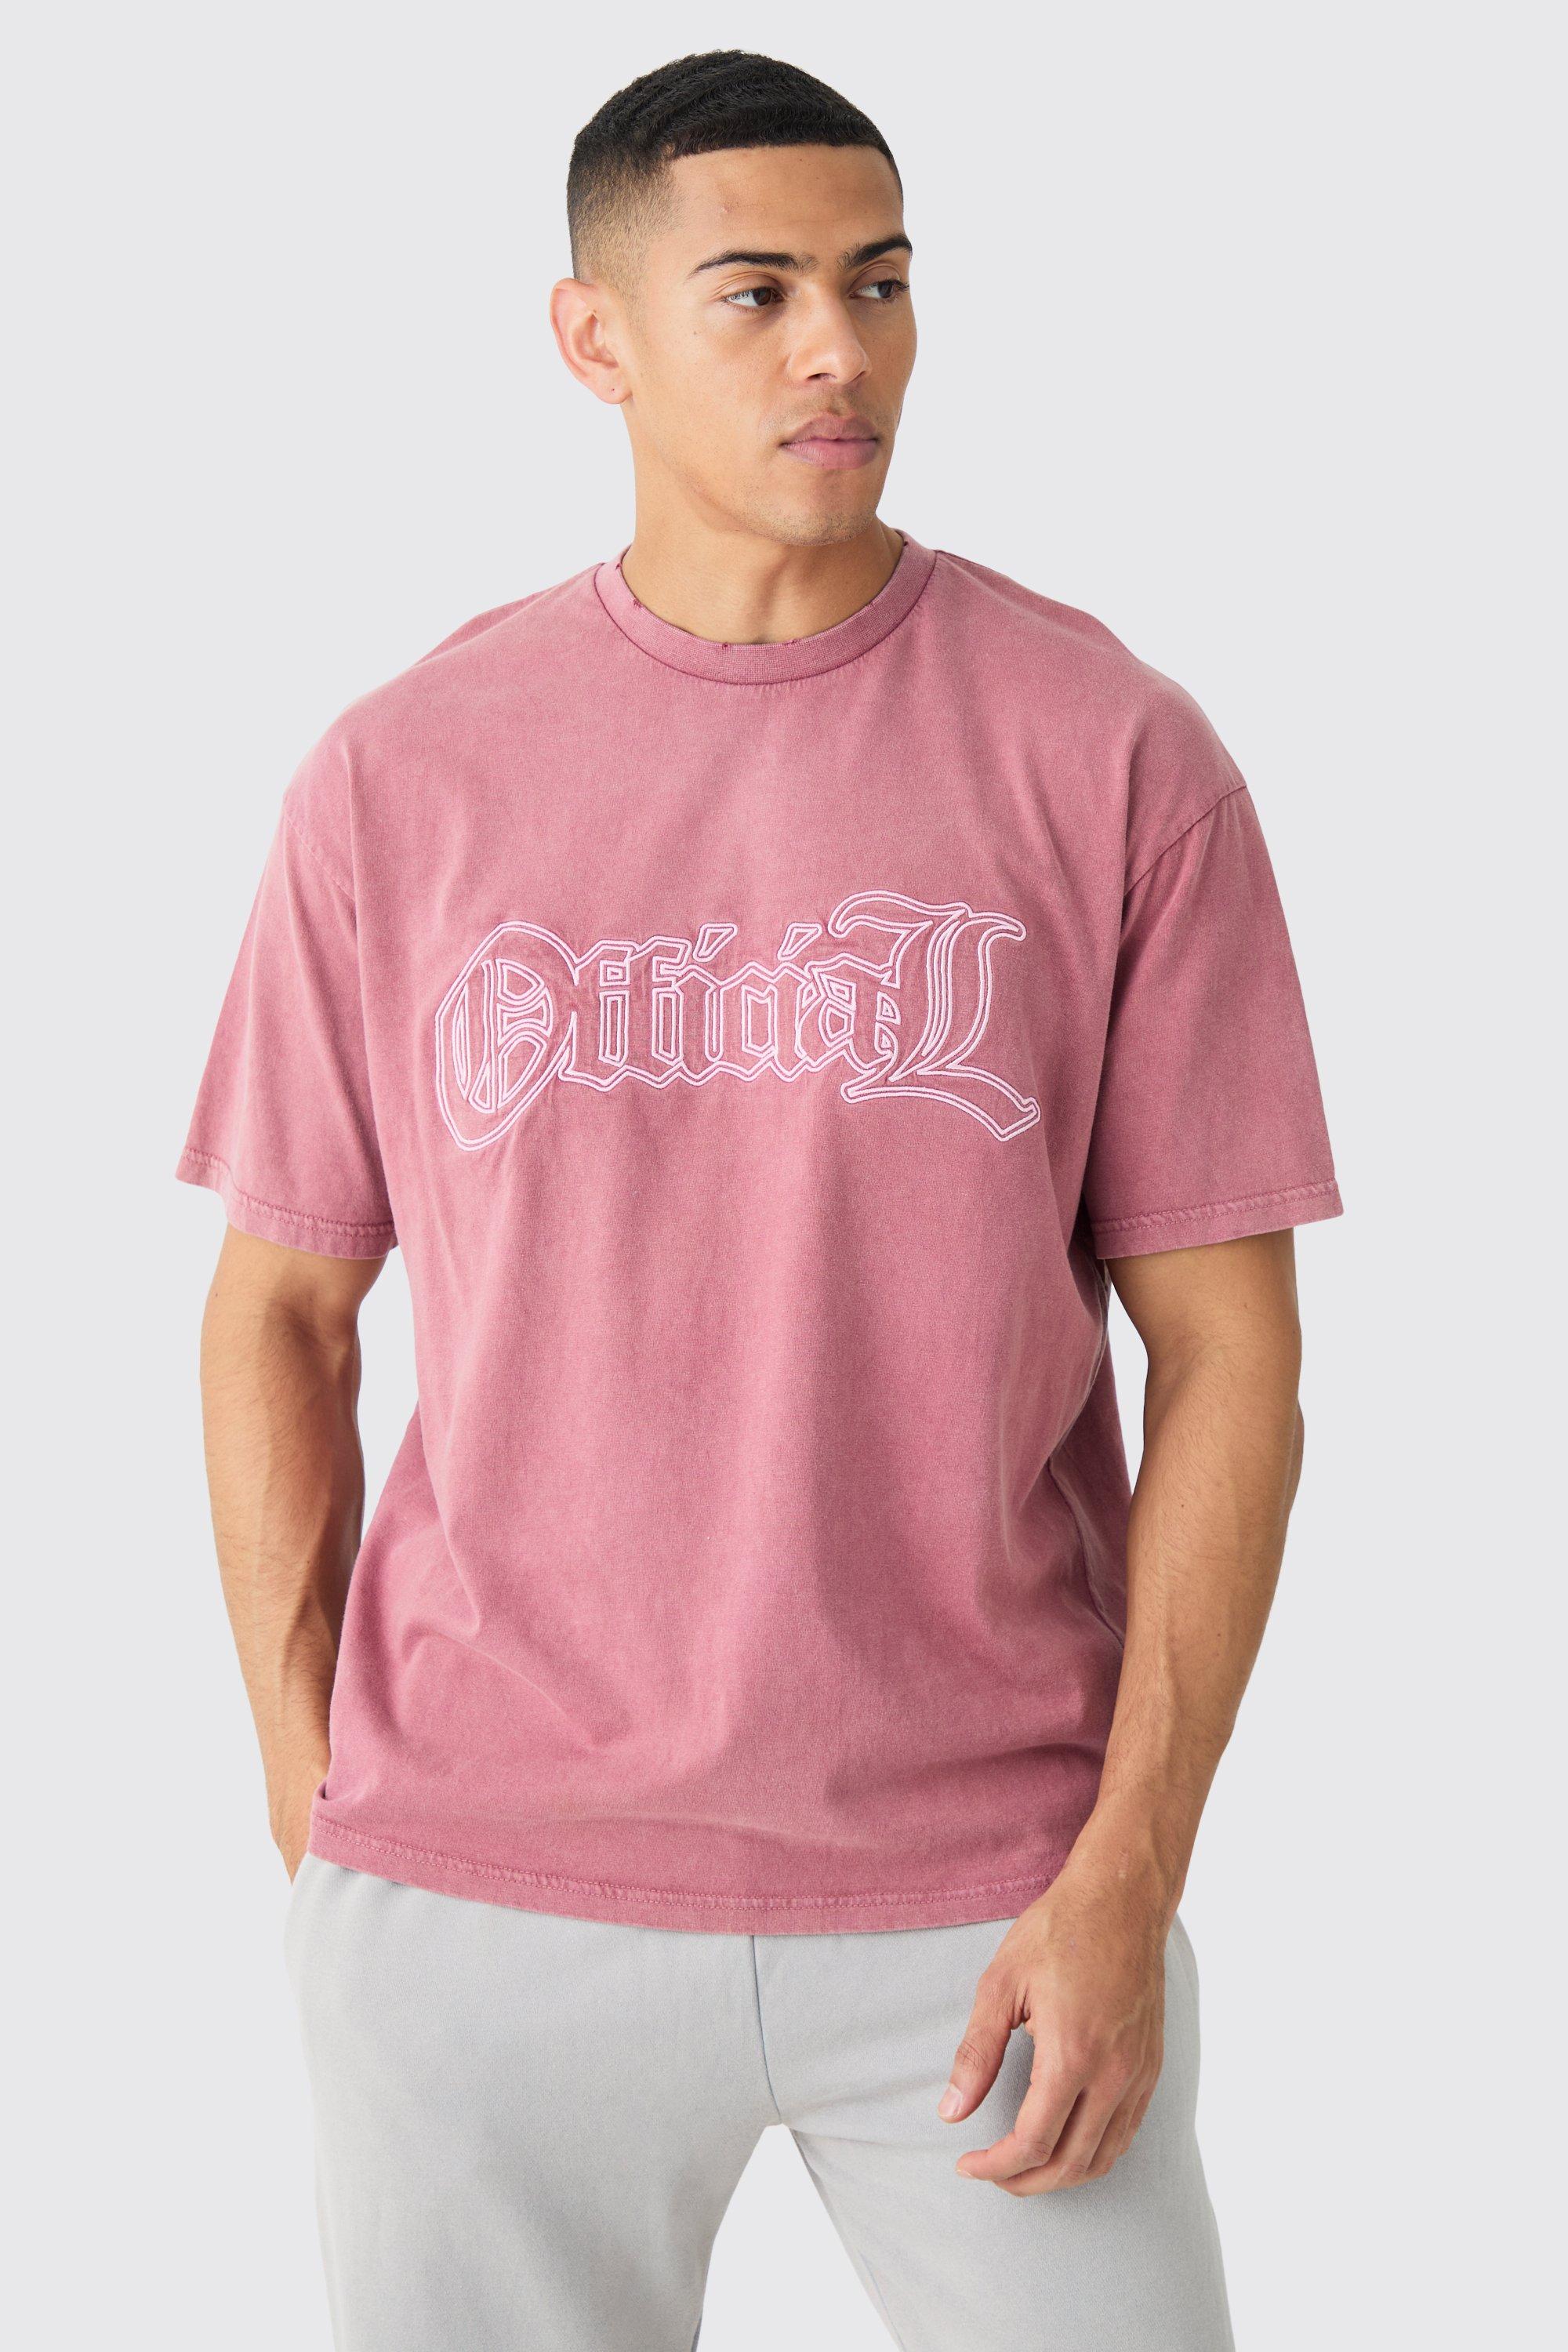 Image of Oversized Acid Wash Official Embroidered Distressed T-shirt, Pink